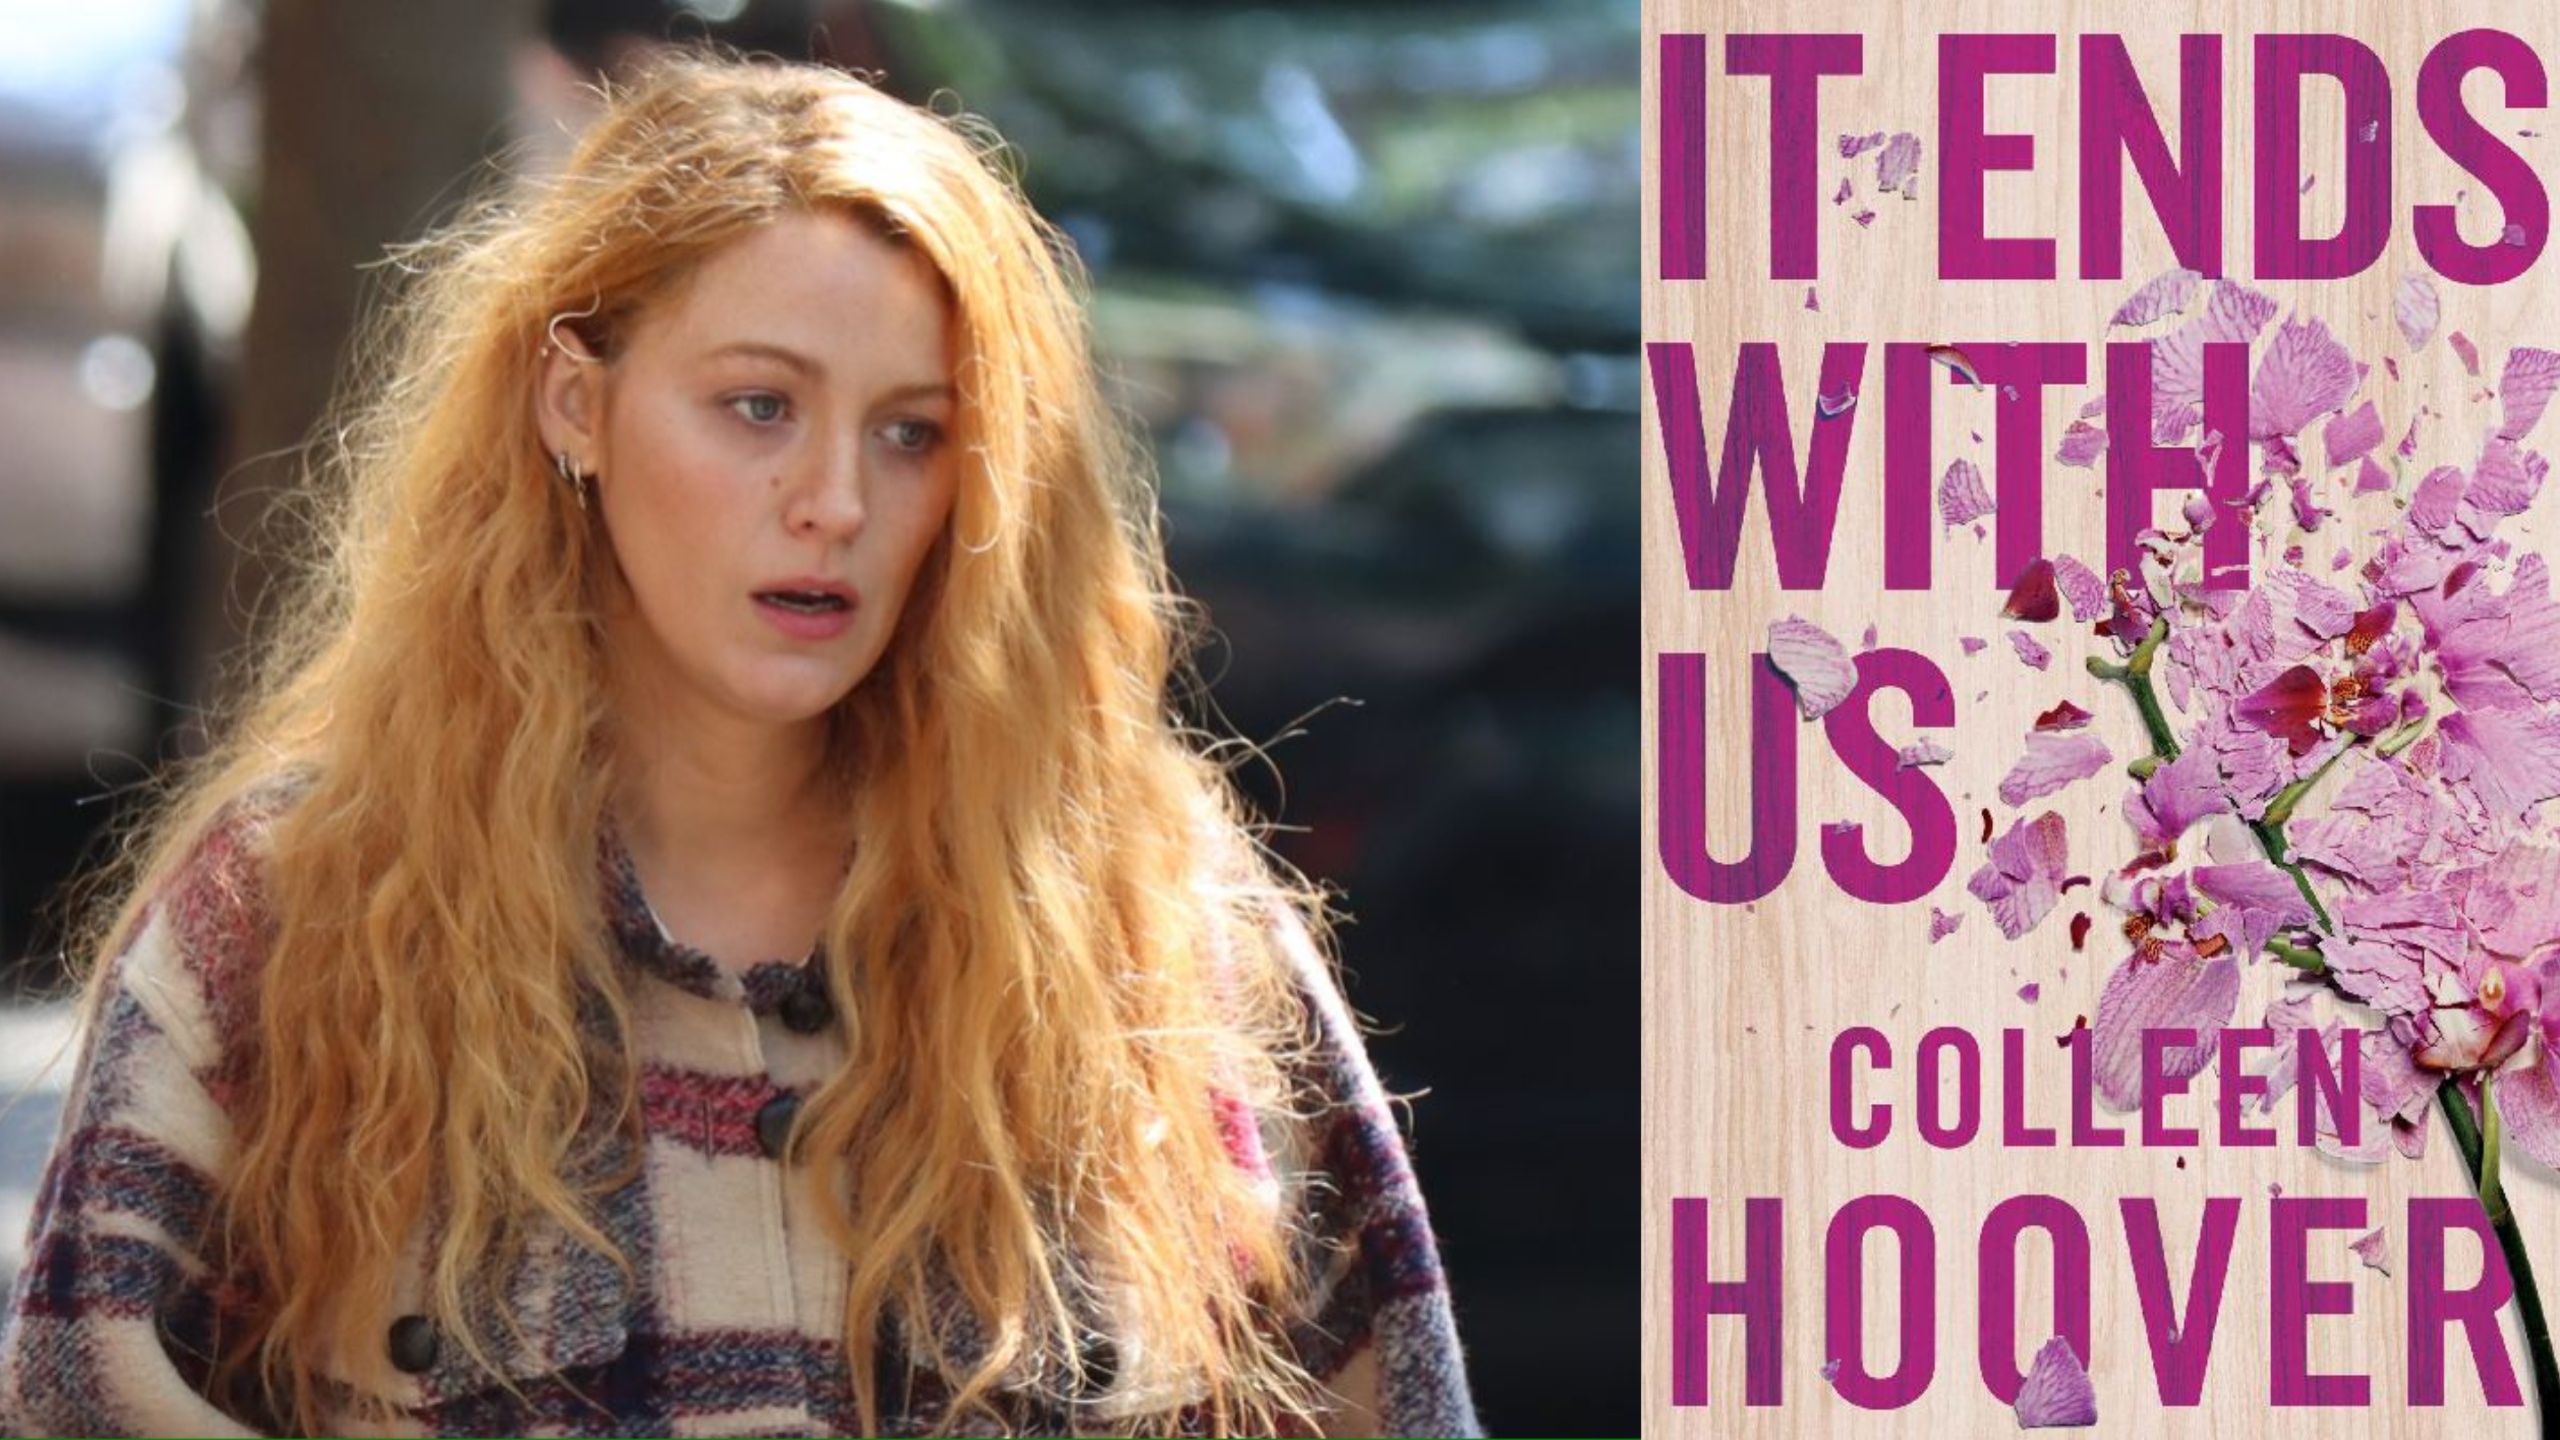 Blake Lively's movie It Ends With Us gets new summer release date.